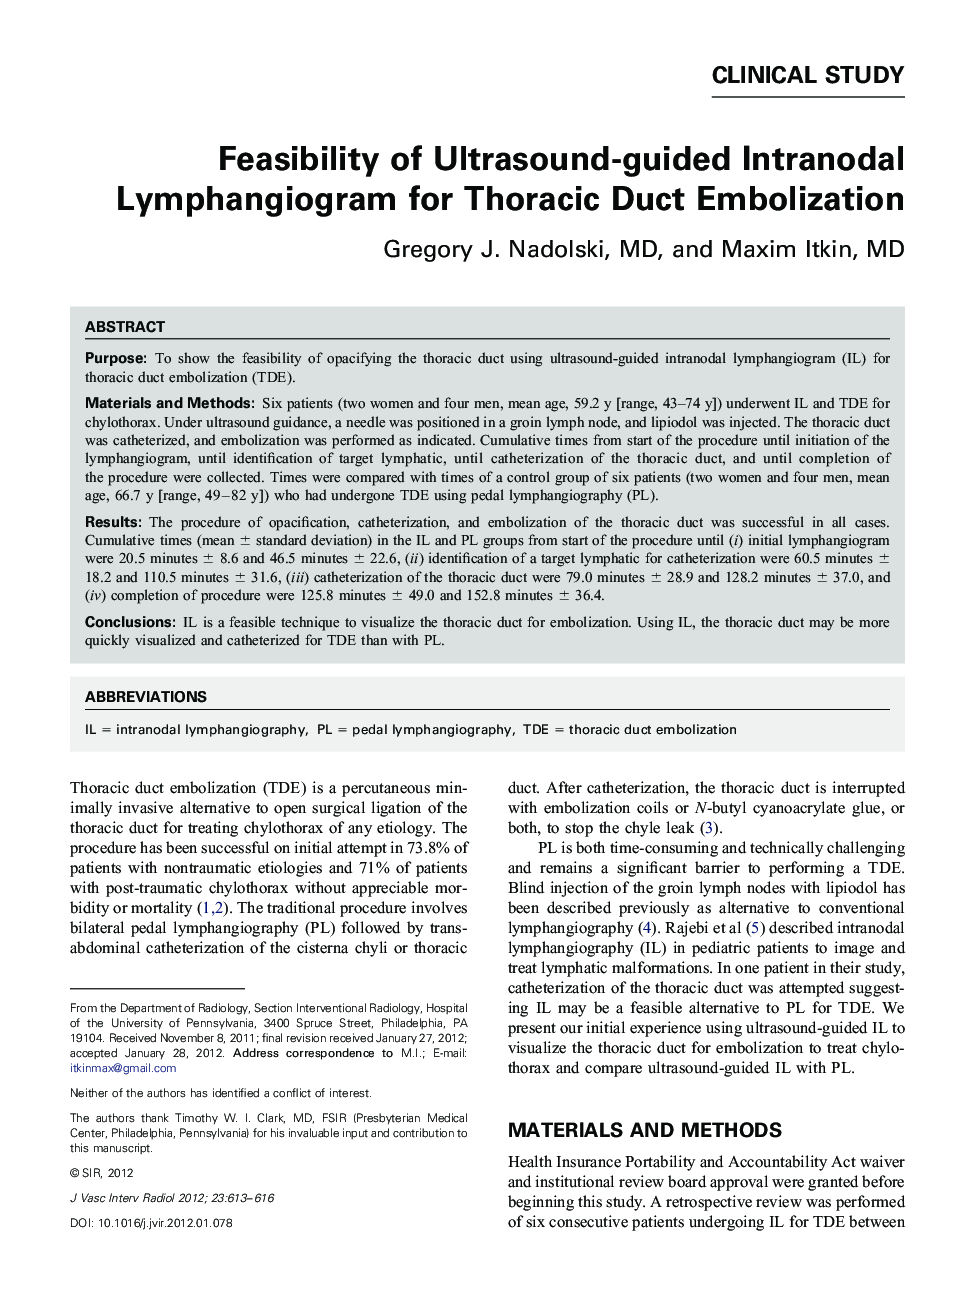 Feasibility of Ultrasound-guided Intranodal Lymphangiogram for Thoracic Duct Embolization